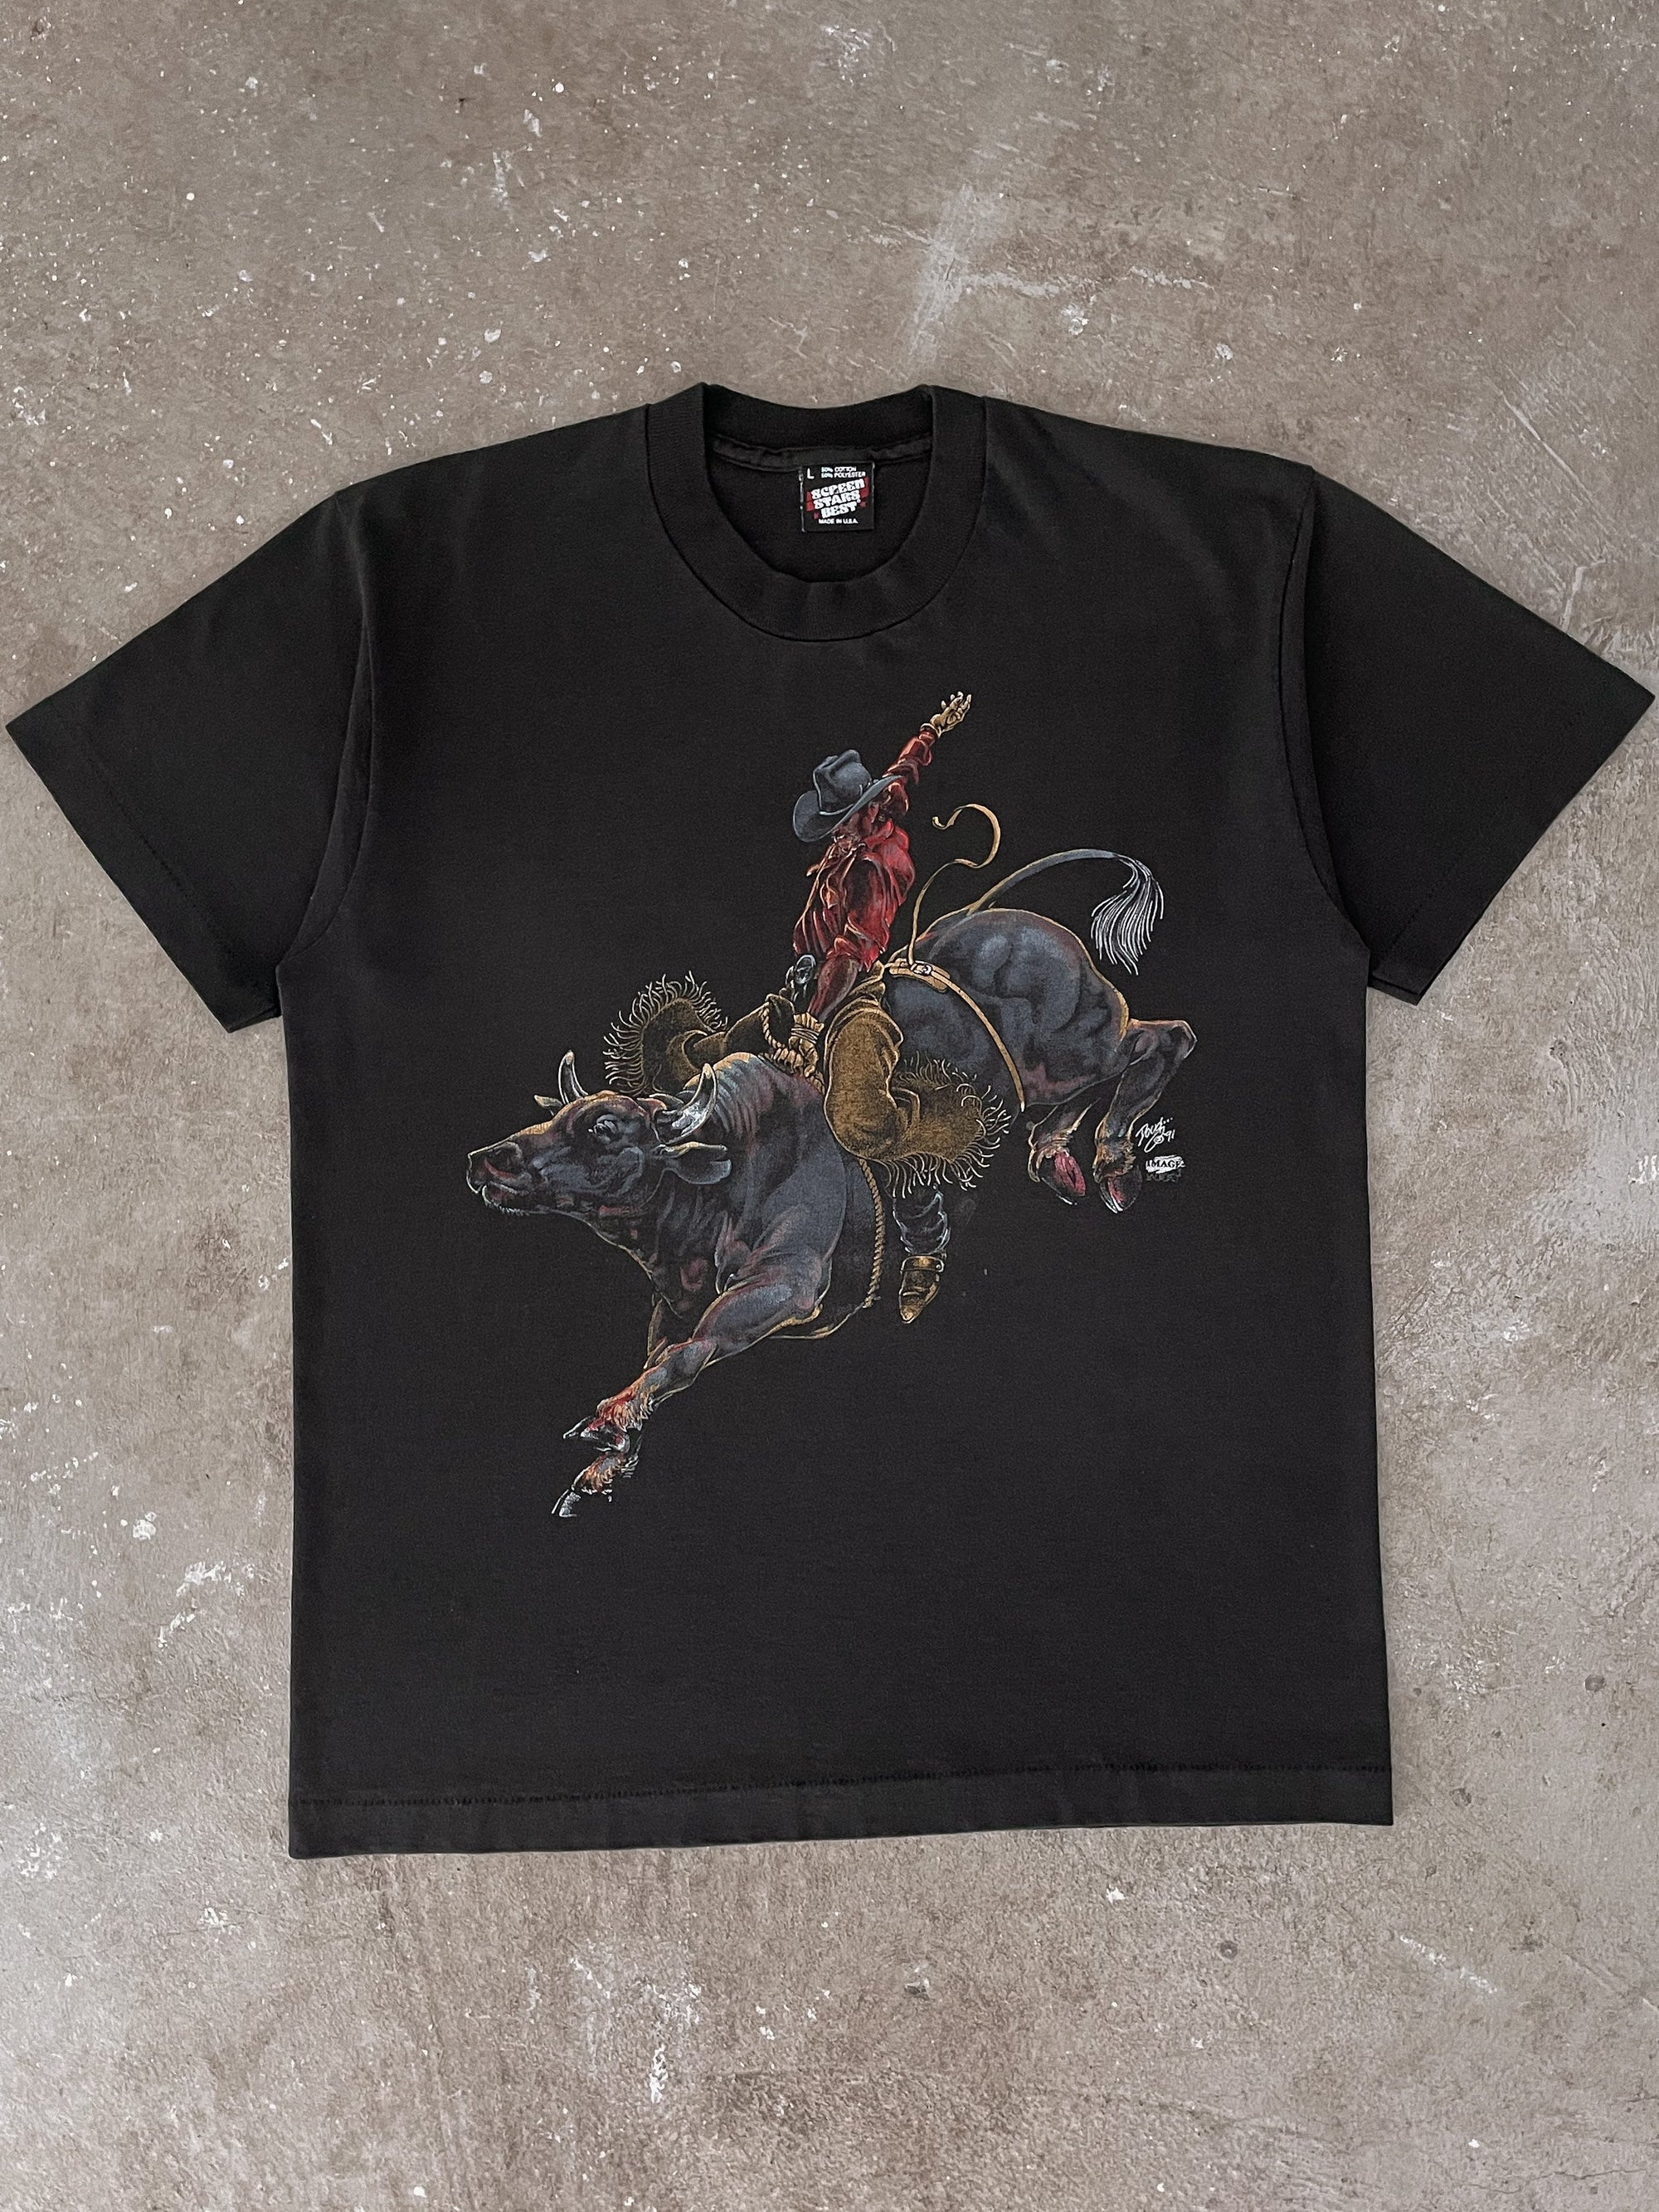 1990s “Bull Riding” Single Stitched Tee (M)